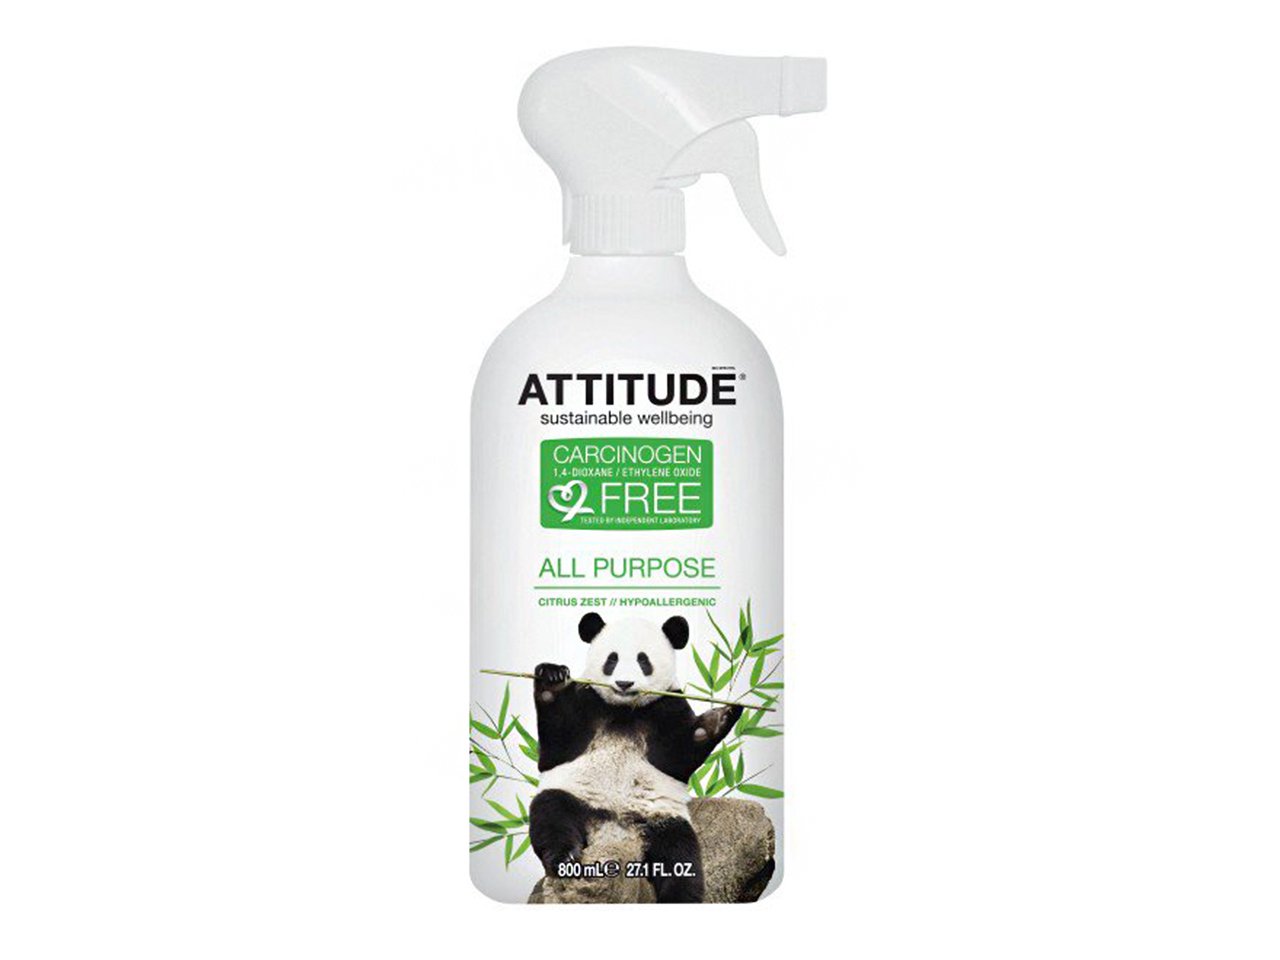 Eco-friendly cleaners, Attitude spray bottle with panda photo on it